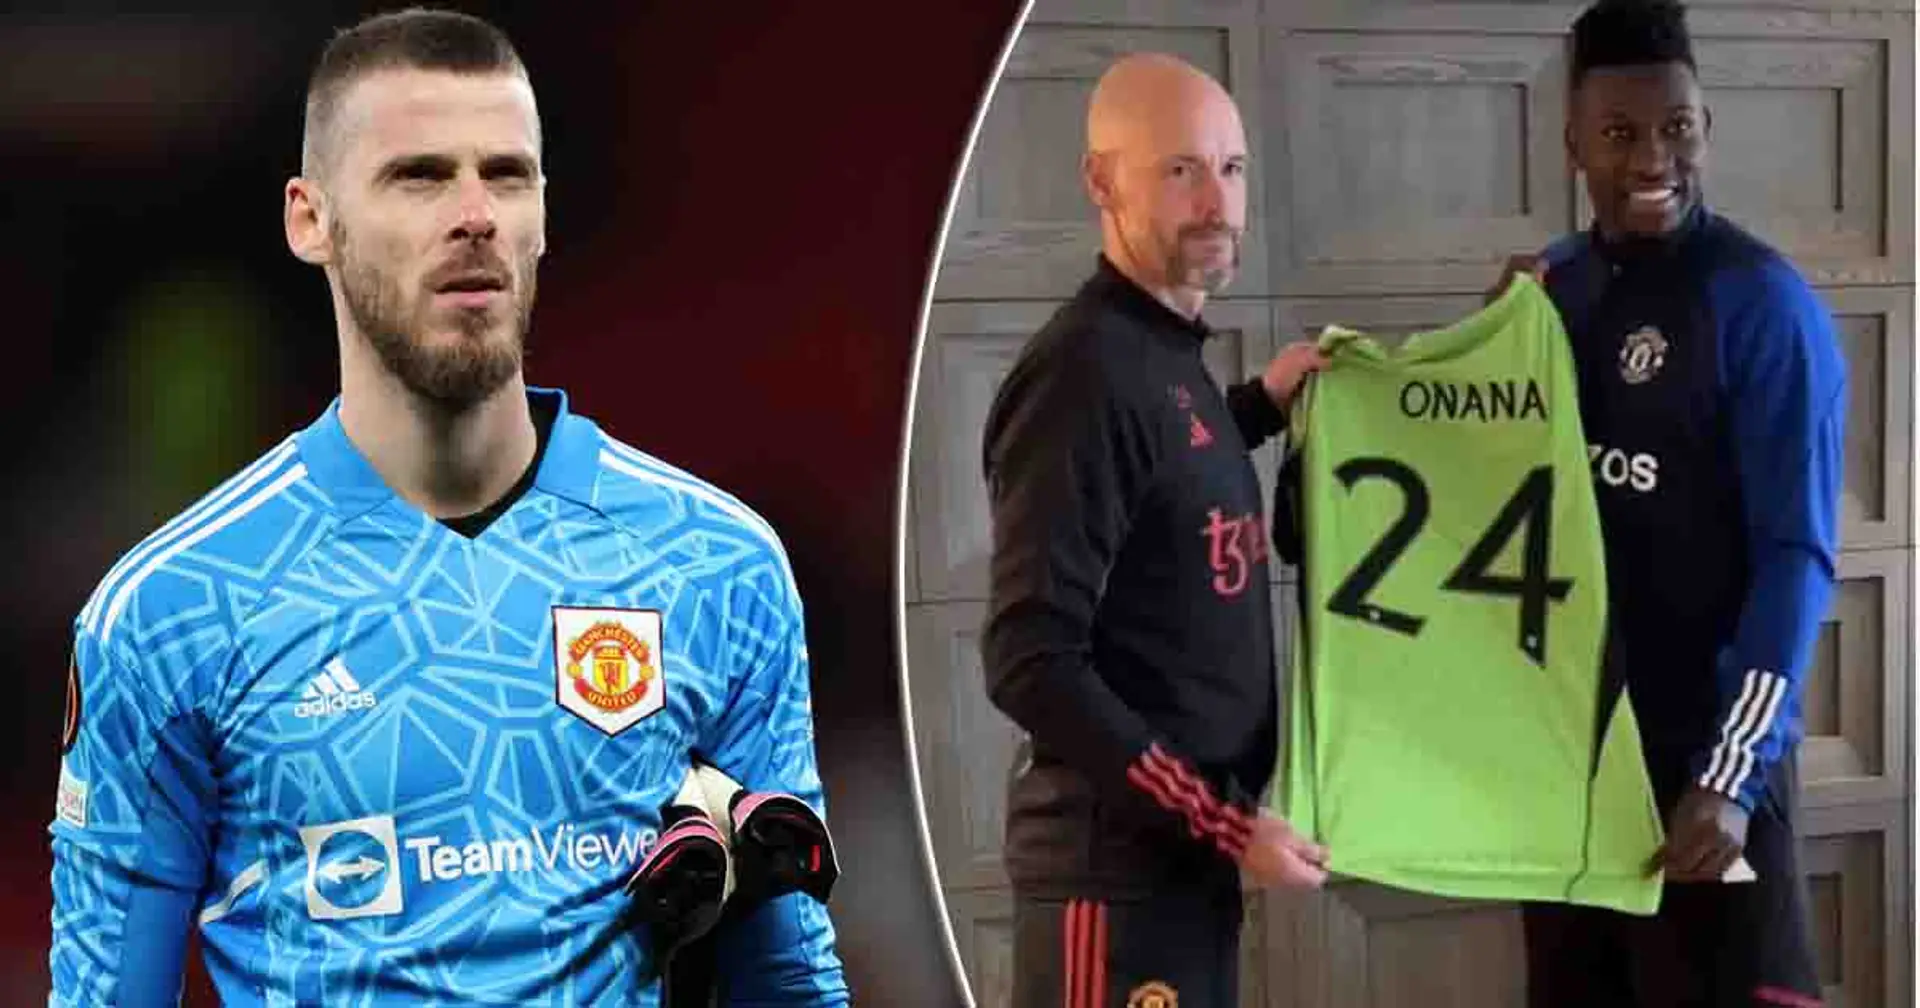 Revealed: Which match convinced Erik ten Hag to replace De Gea with Onana as Man United no.1